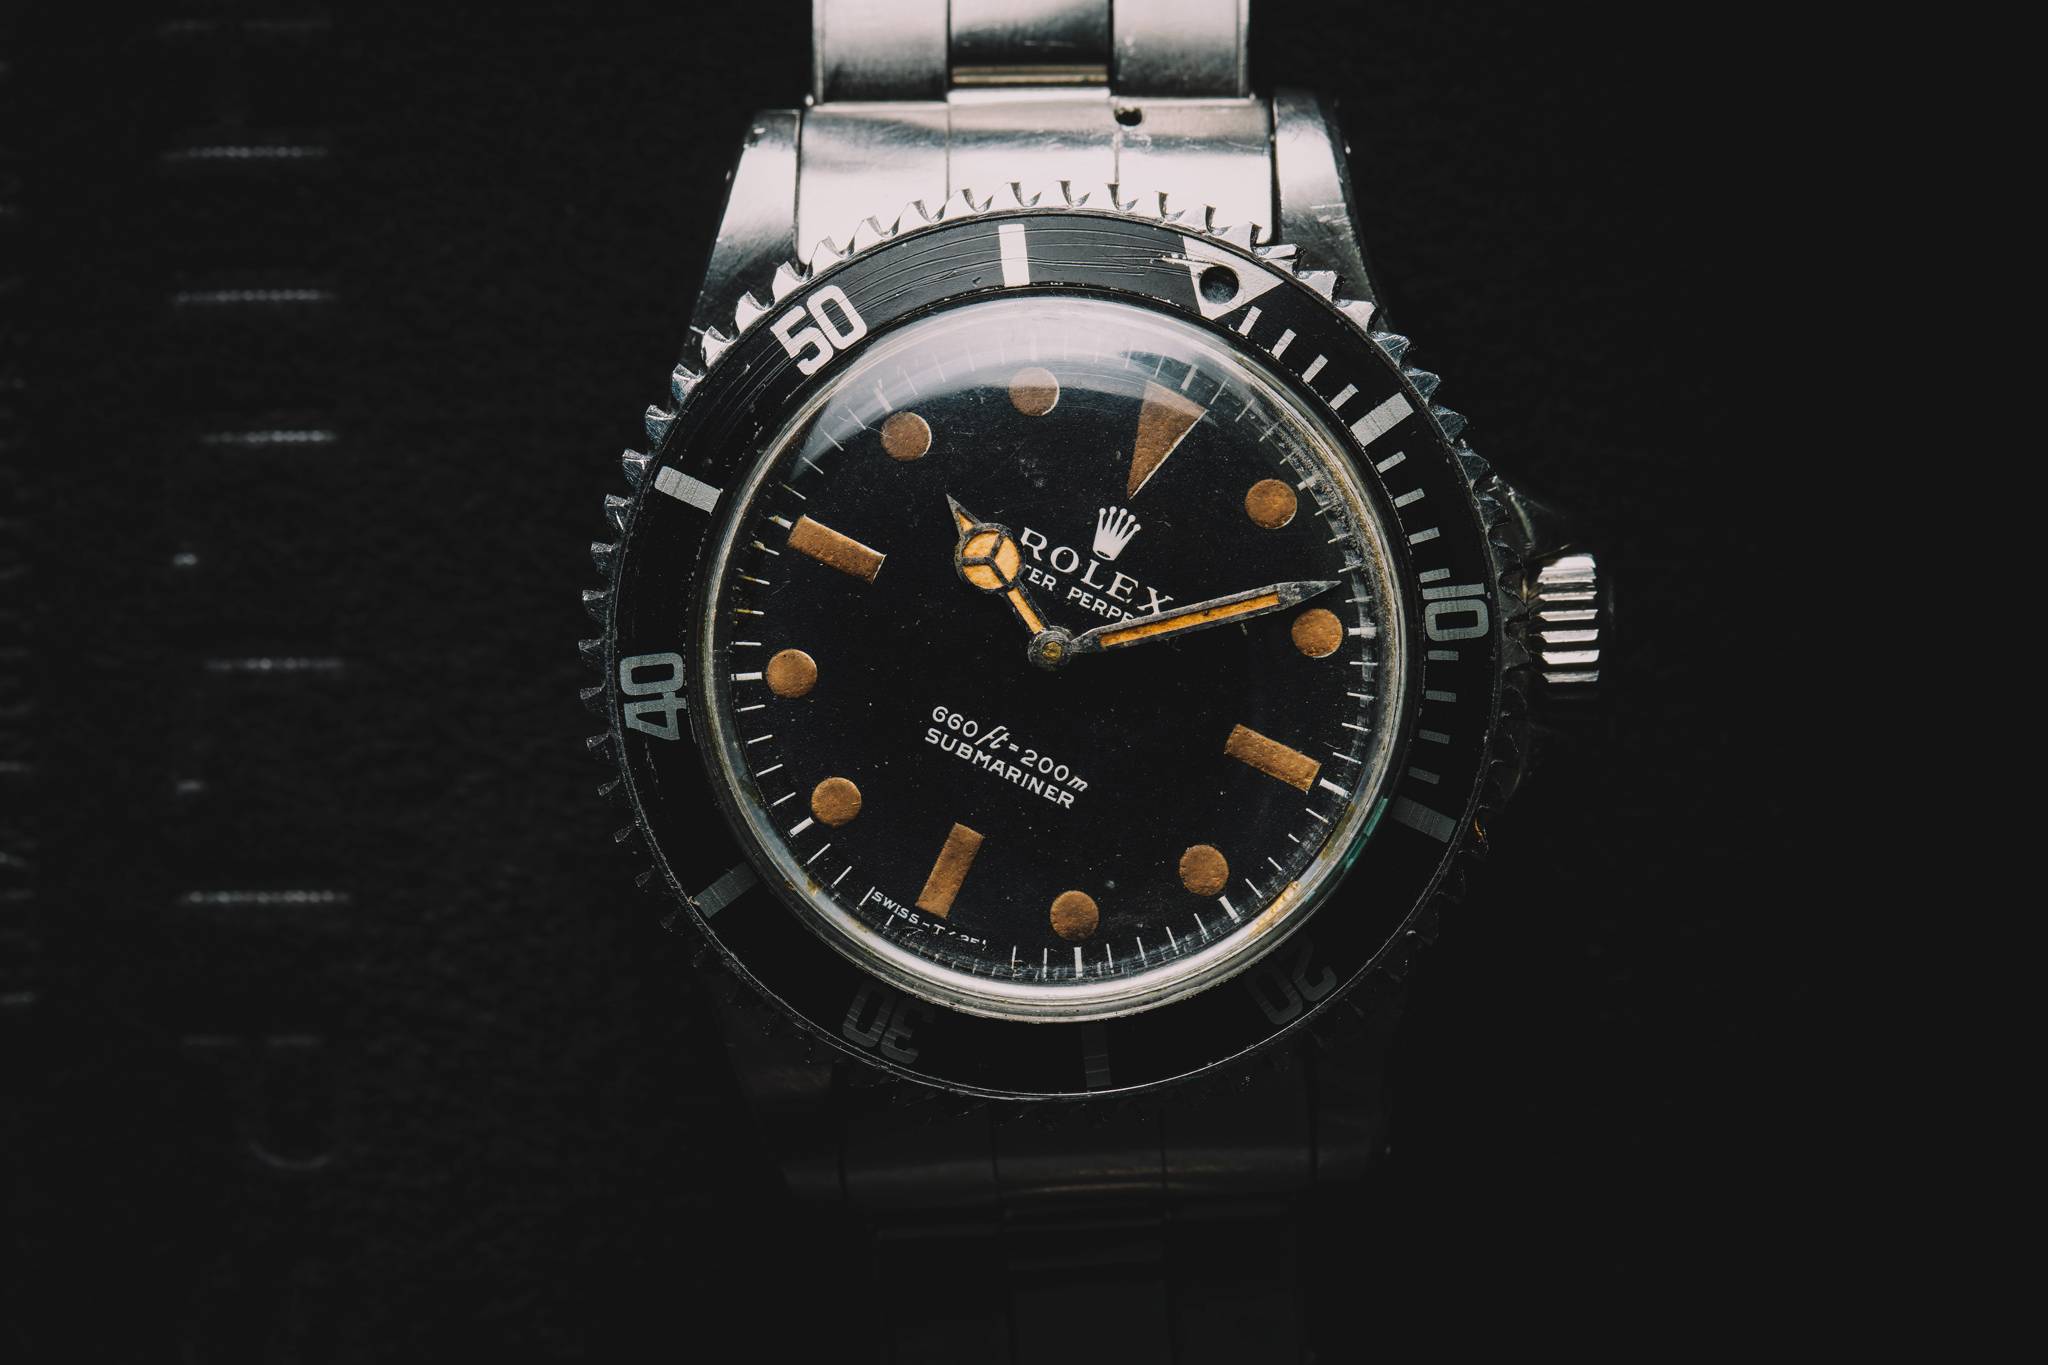 Rolex 'James Bond' Submariner from 'Live and Let Die', Reference 5513, Stainless Steel, 1972